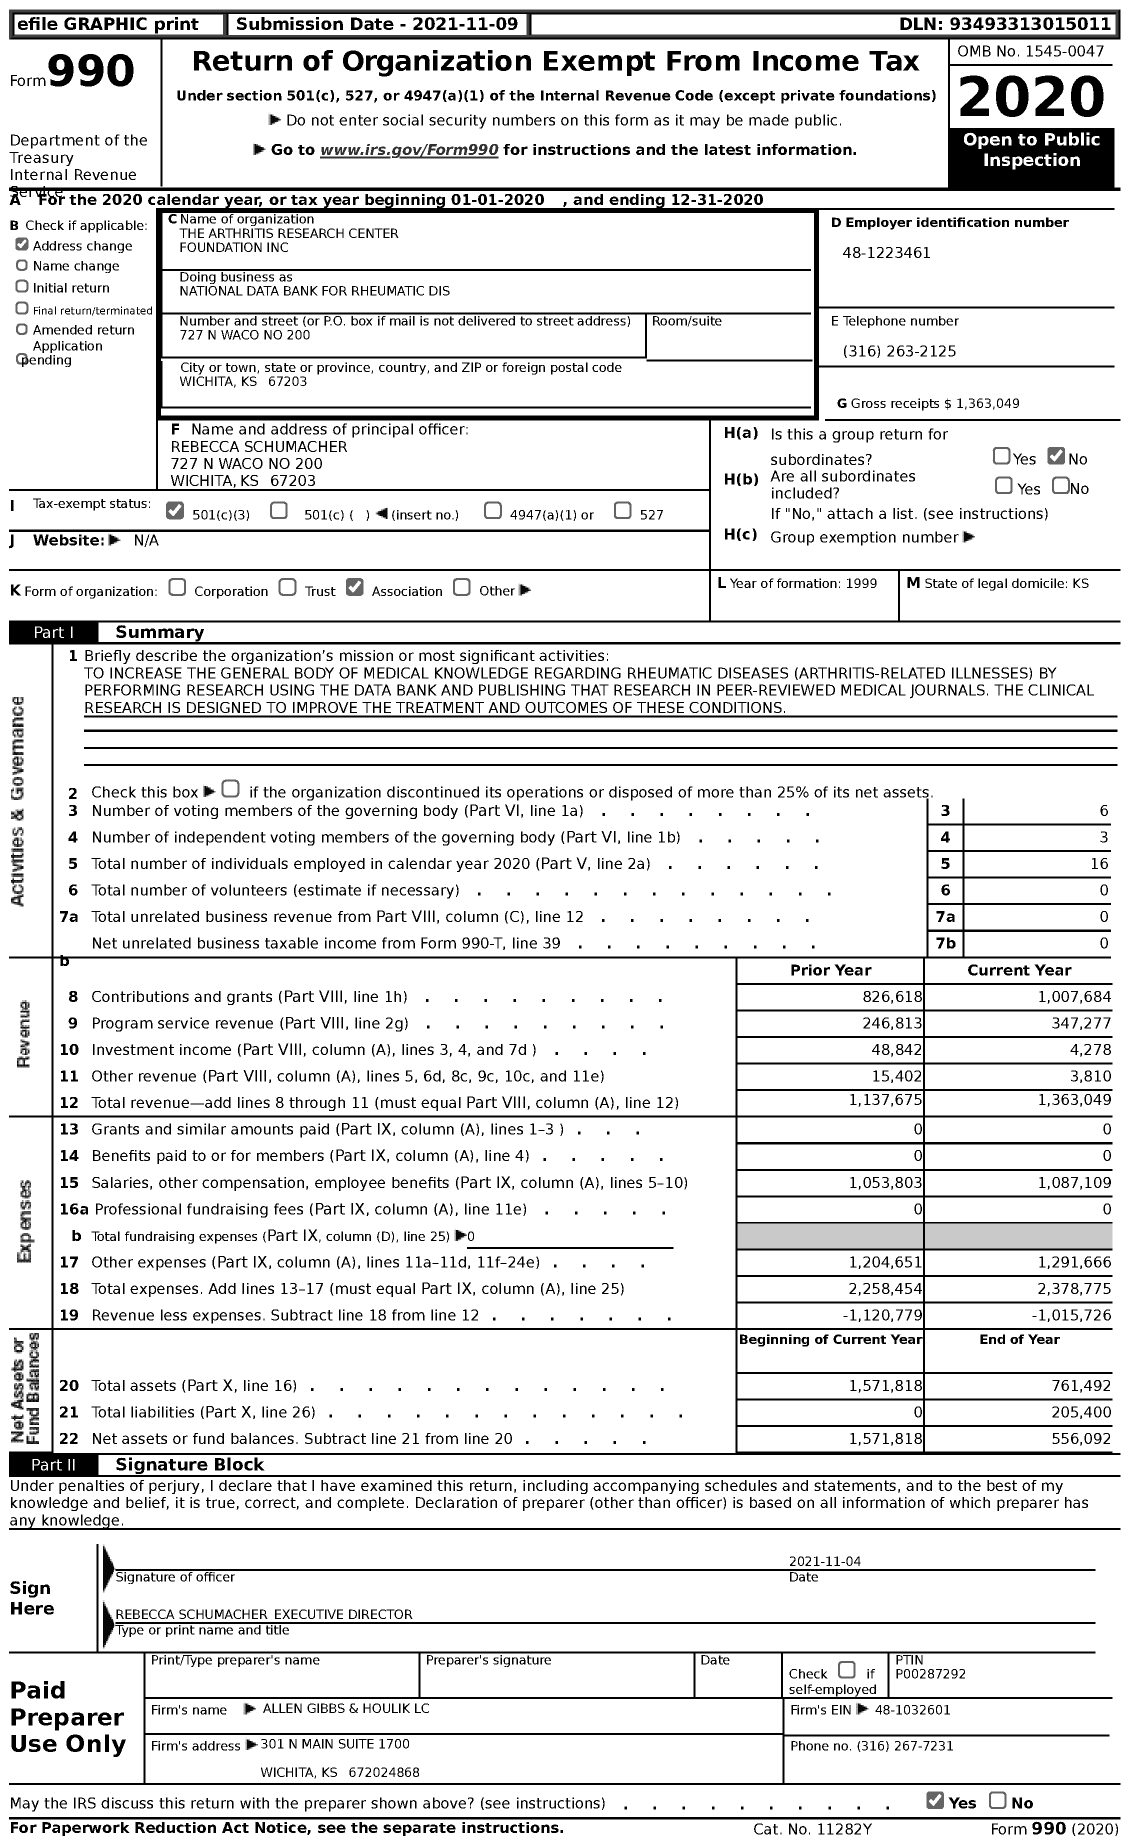 Image of first page of 2020 Form 990 for National Data Bank for Rheumatic Dis